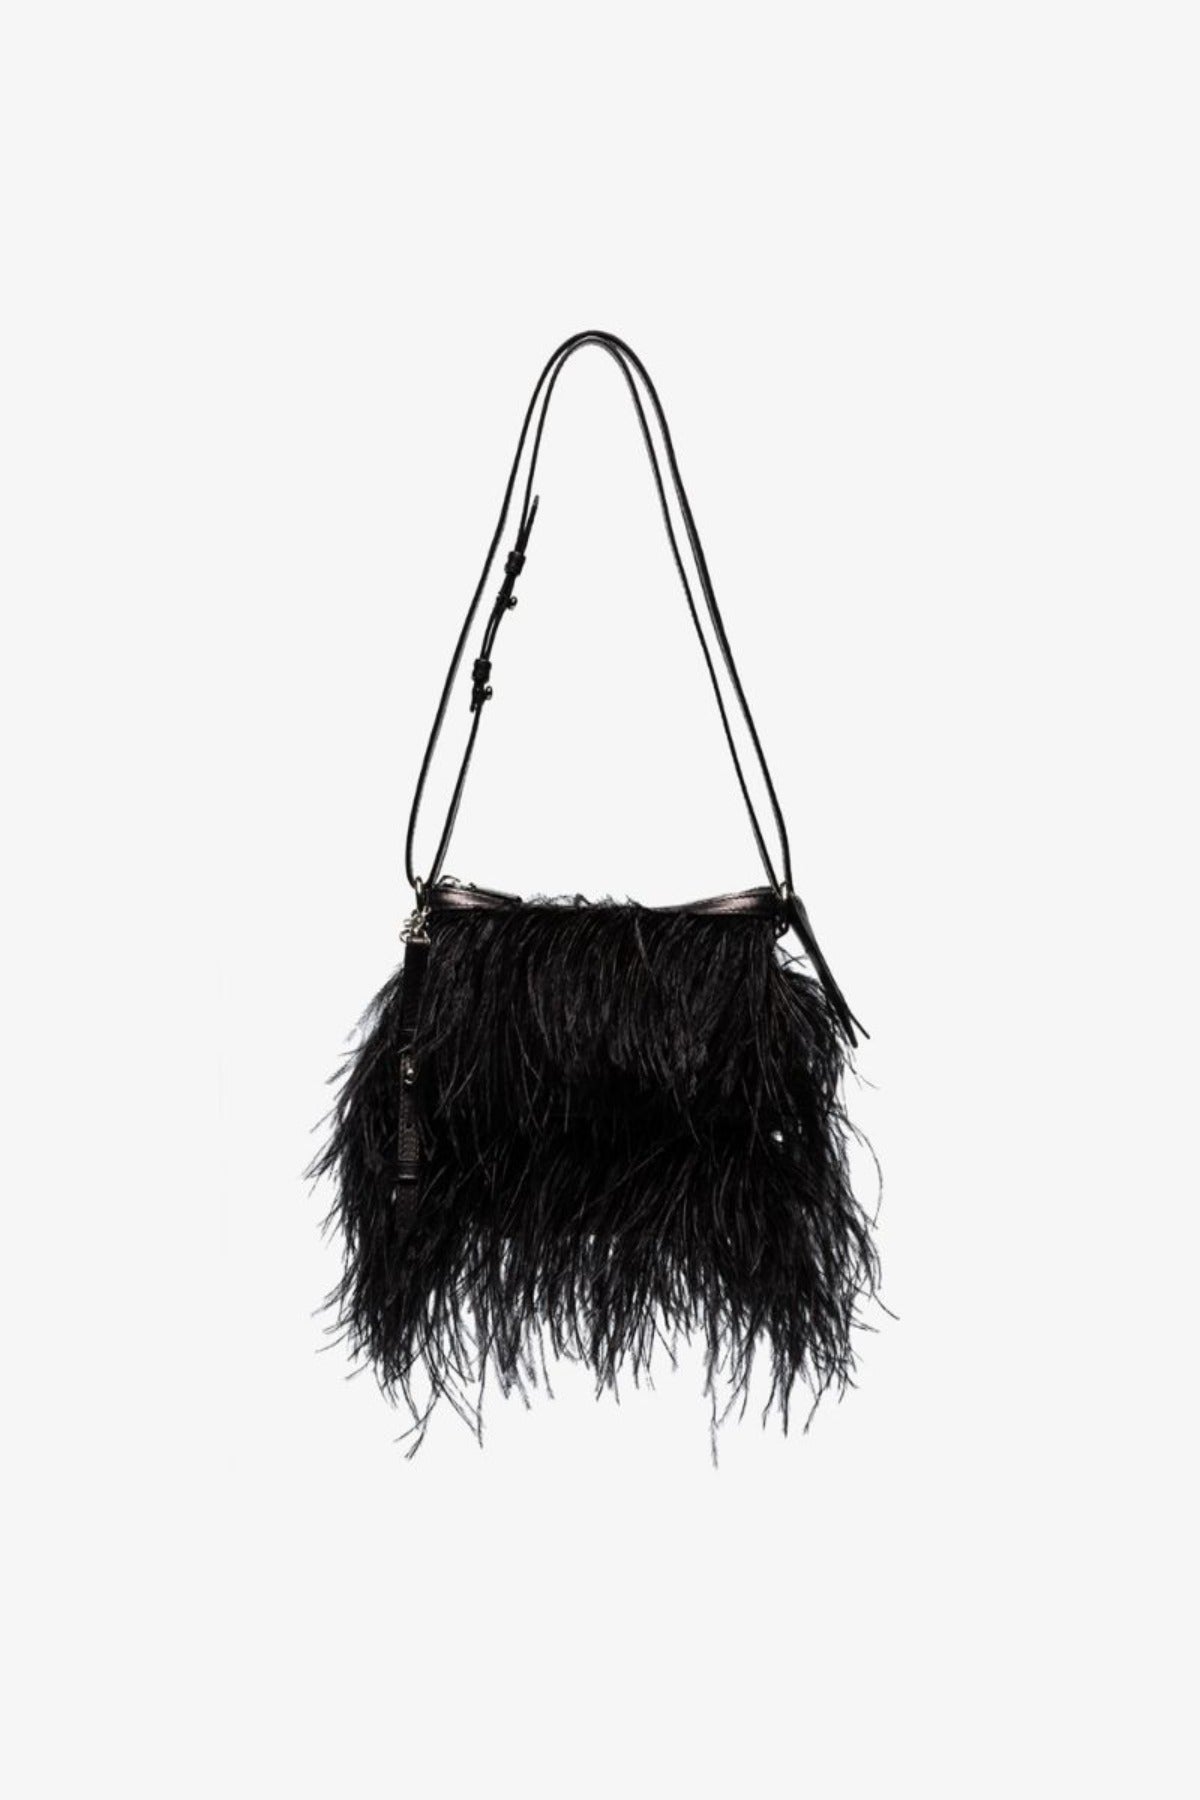 Fly Away Home Black Feather Purse